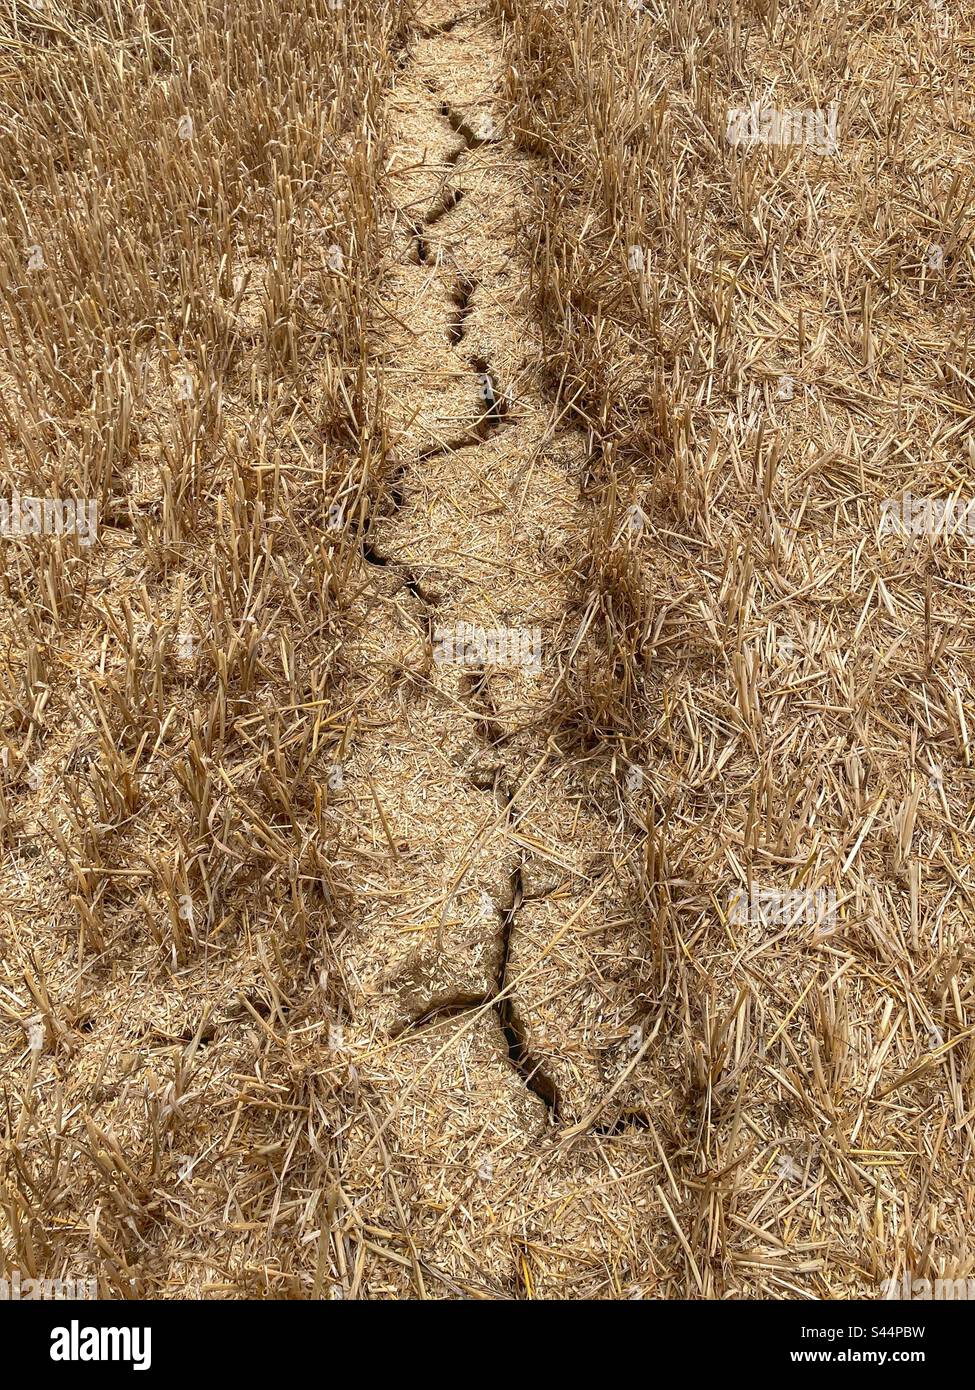 Drought. Dry, cracked earth and wheat stubble in a field after hot summer, detail Stock Photo